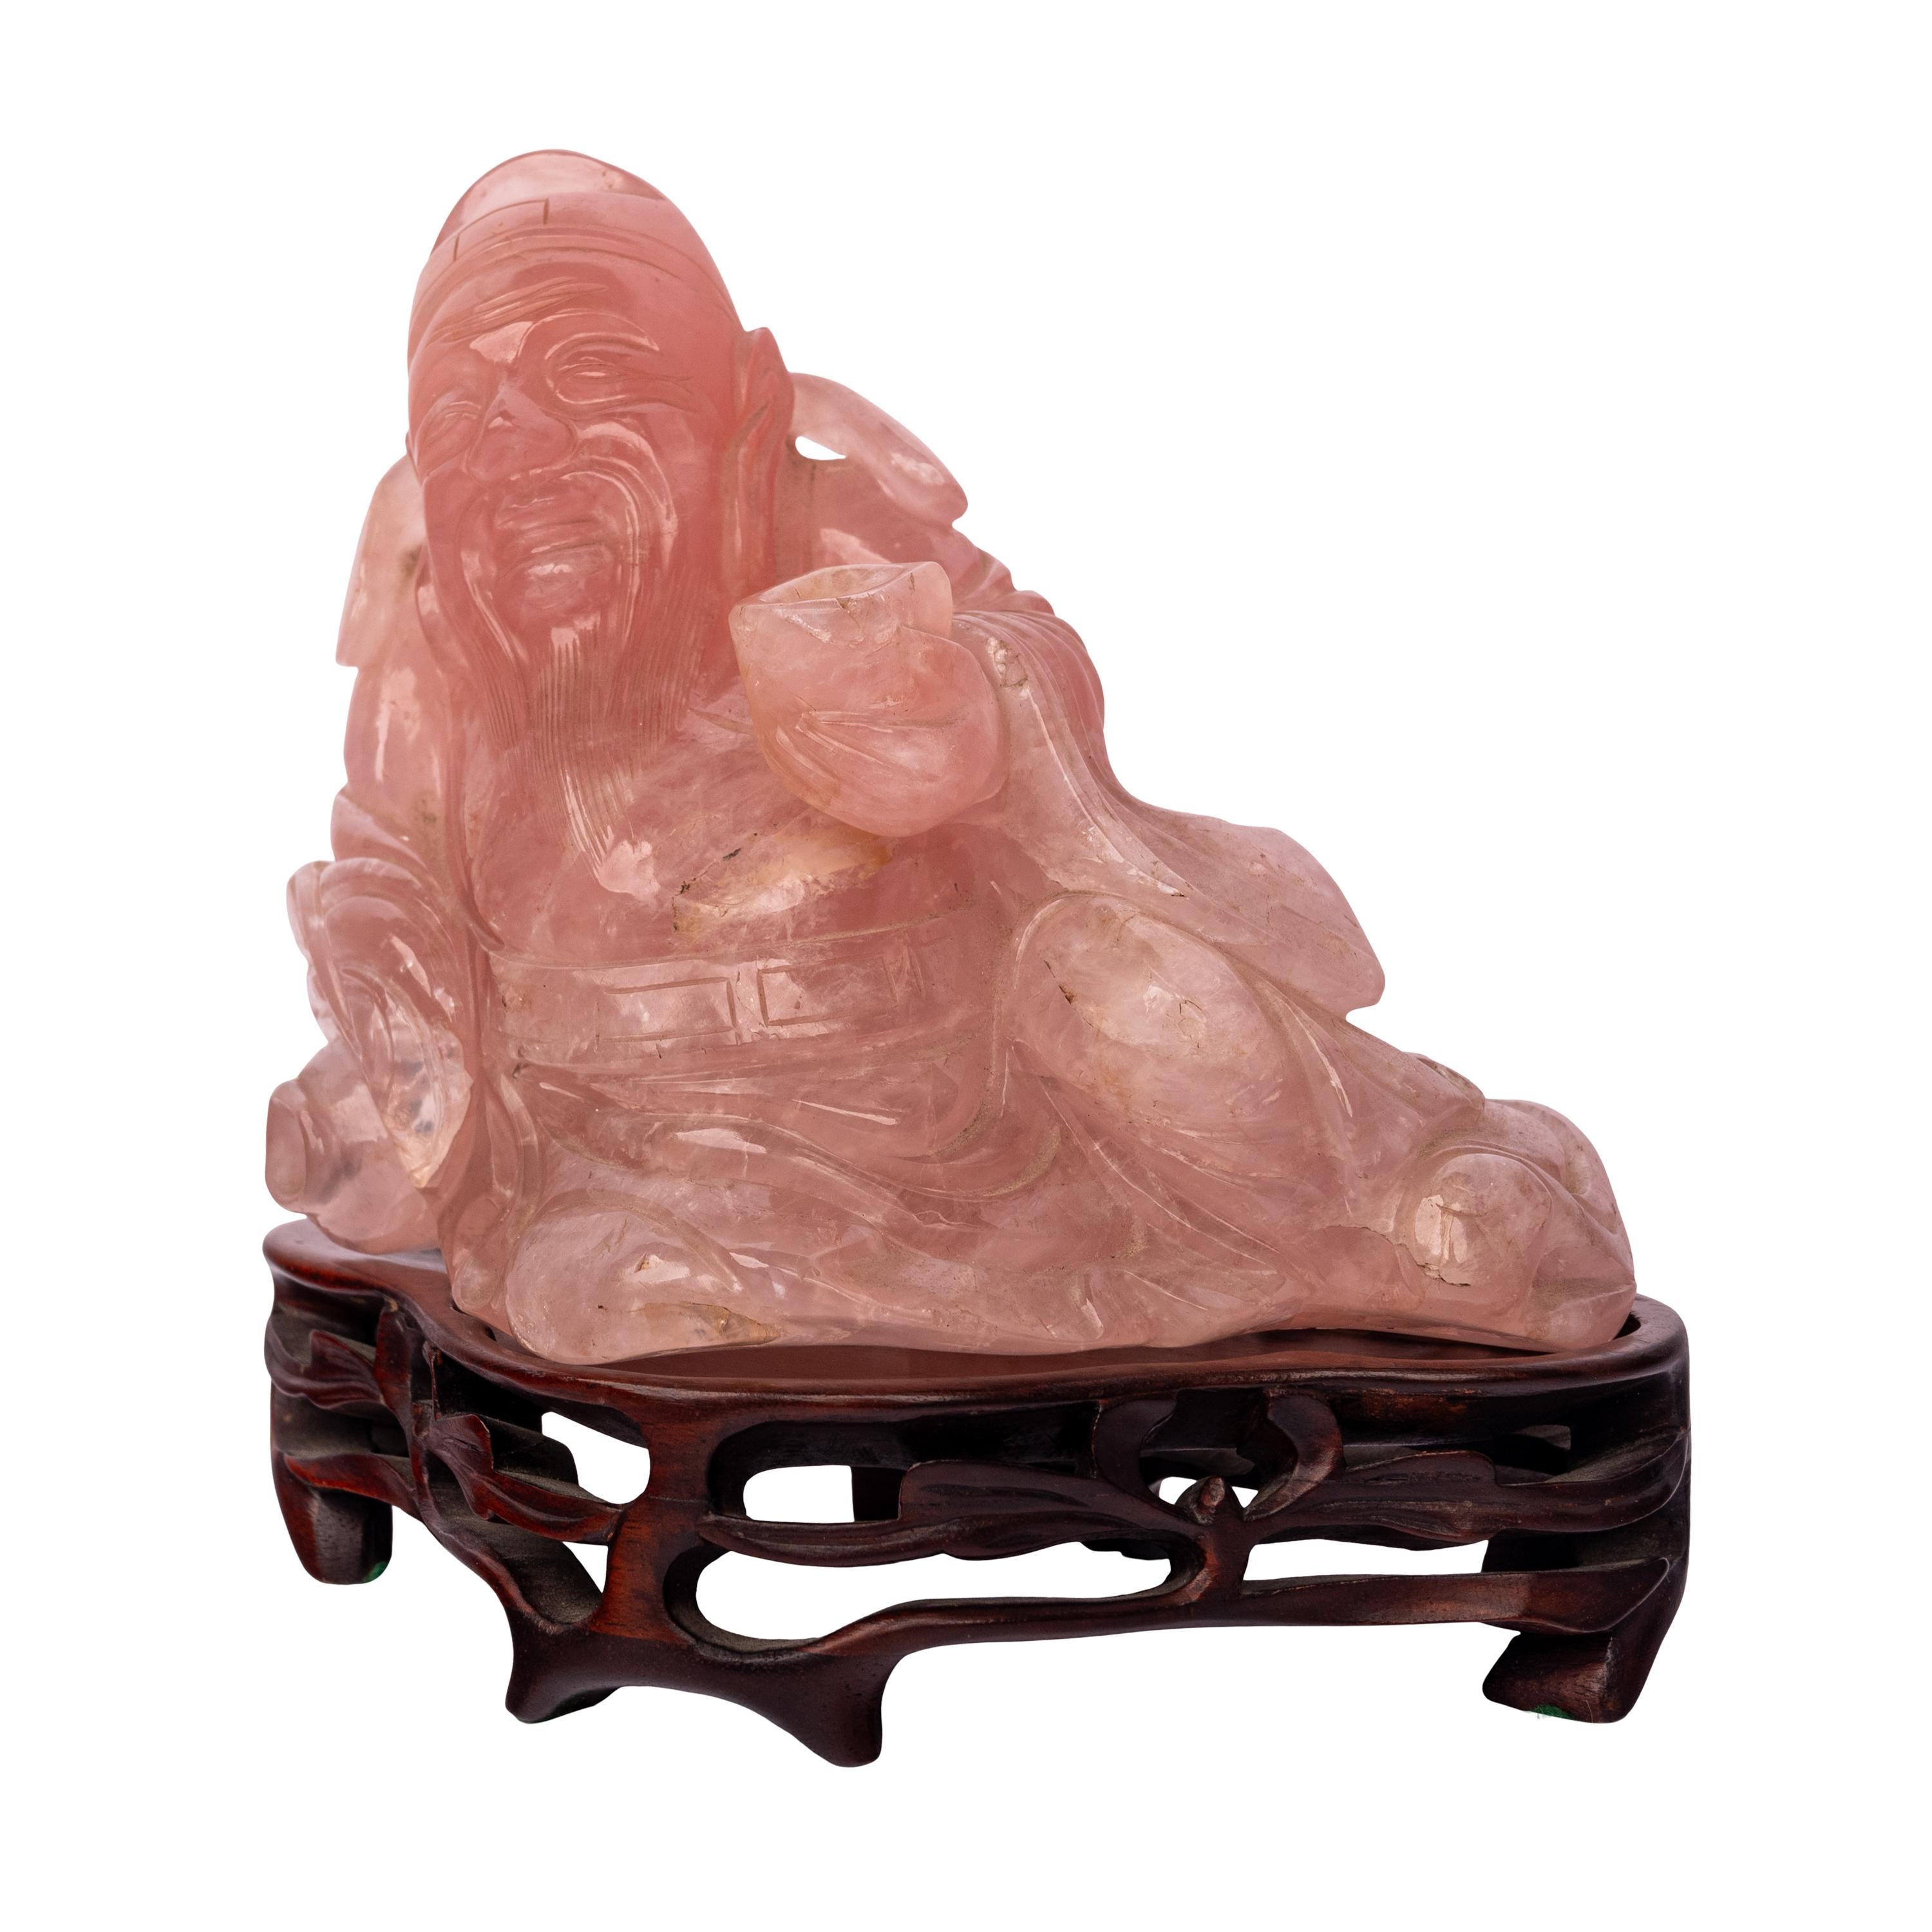 Antique Chinese Qing Dynasty Carved Rose Quartz Hotei Buddha Statue & Stand 1910 For Sale 7